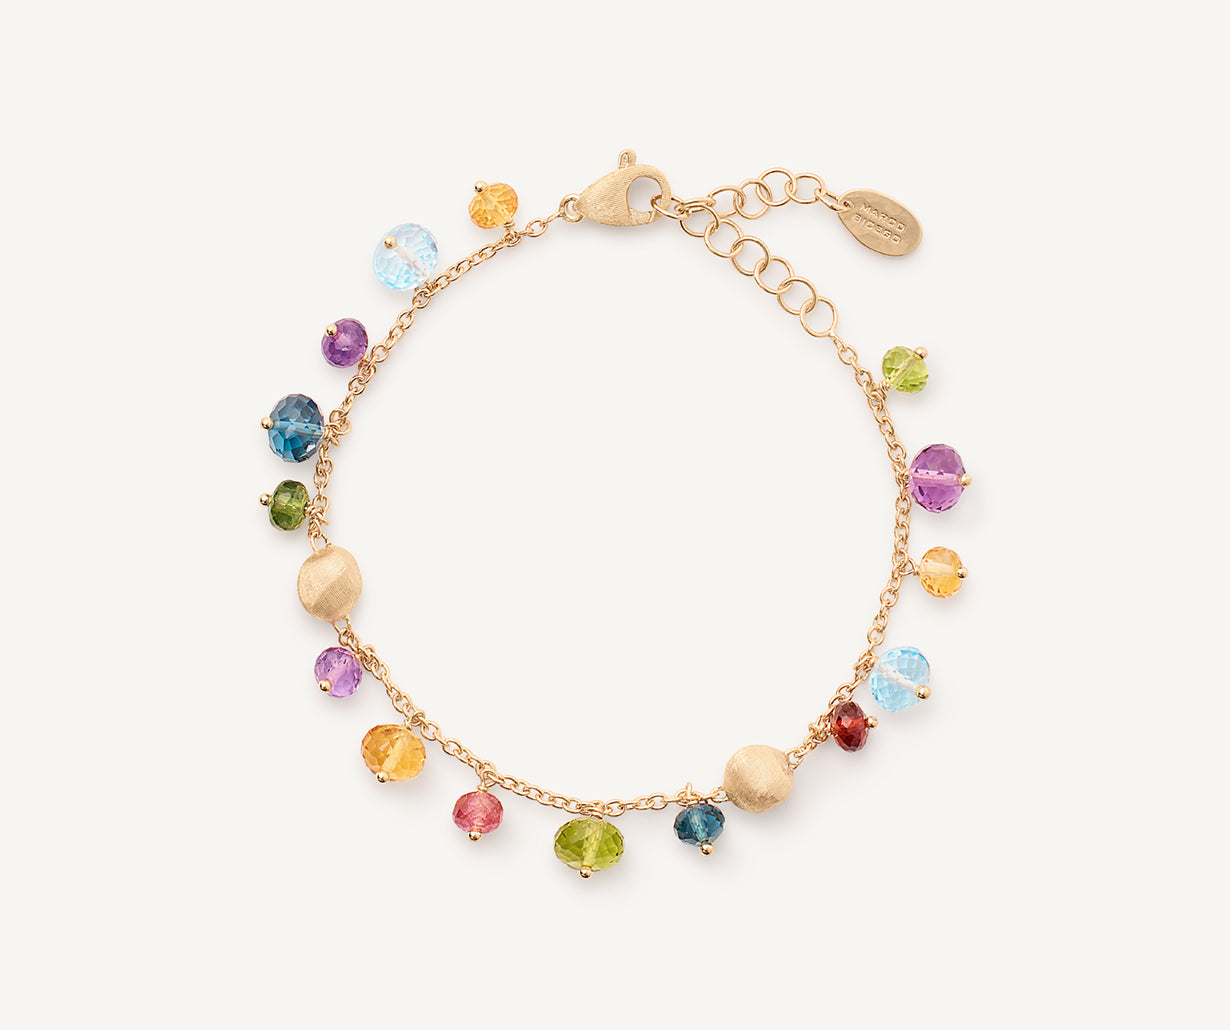 18K YELLOW GOLD MIXED GEMSTONE BRACELET FROM THE THE AFRICA GEMSTONE COLLECTION